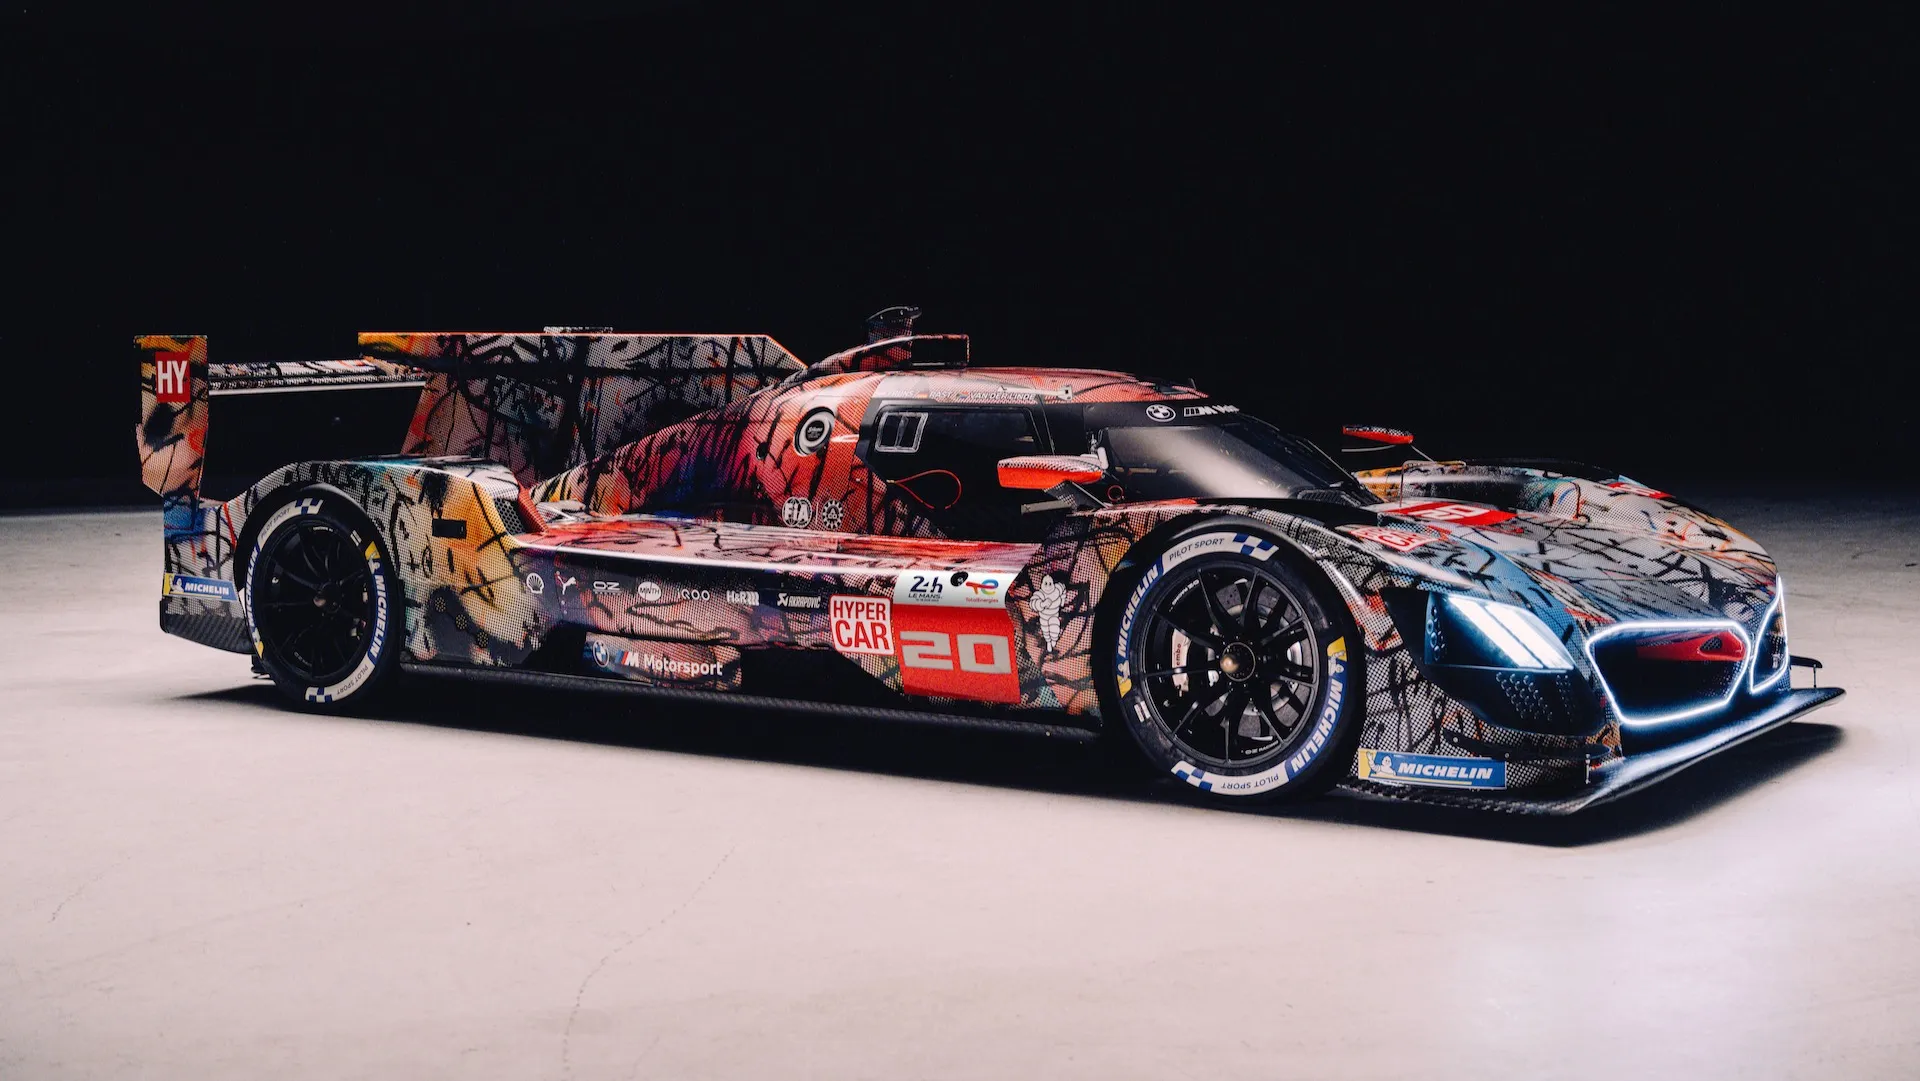 The latest BMW art car is a 215-mile-per-hour race car heading to Le Mans